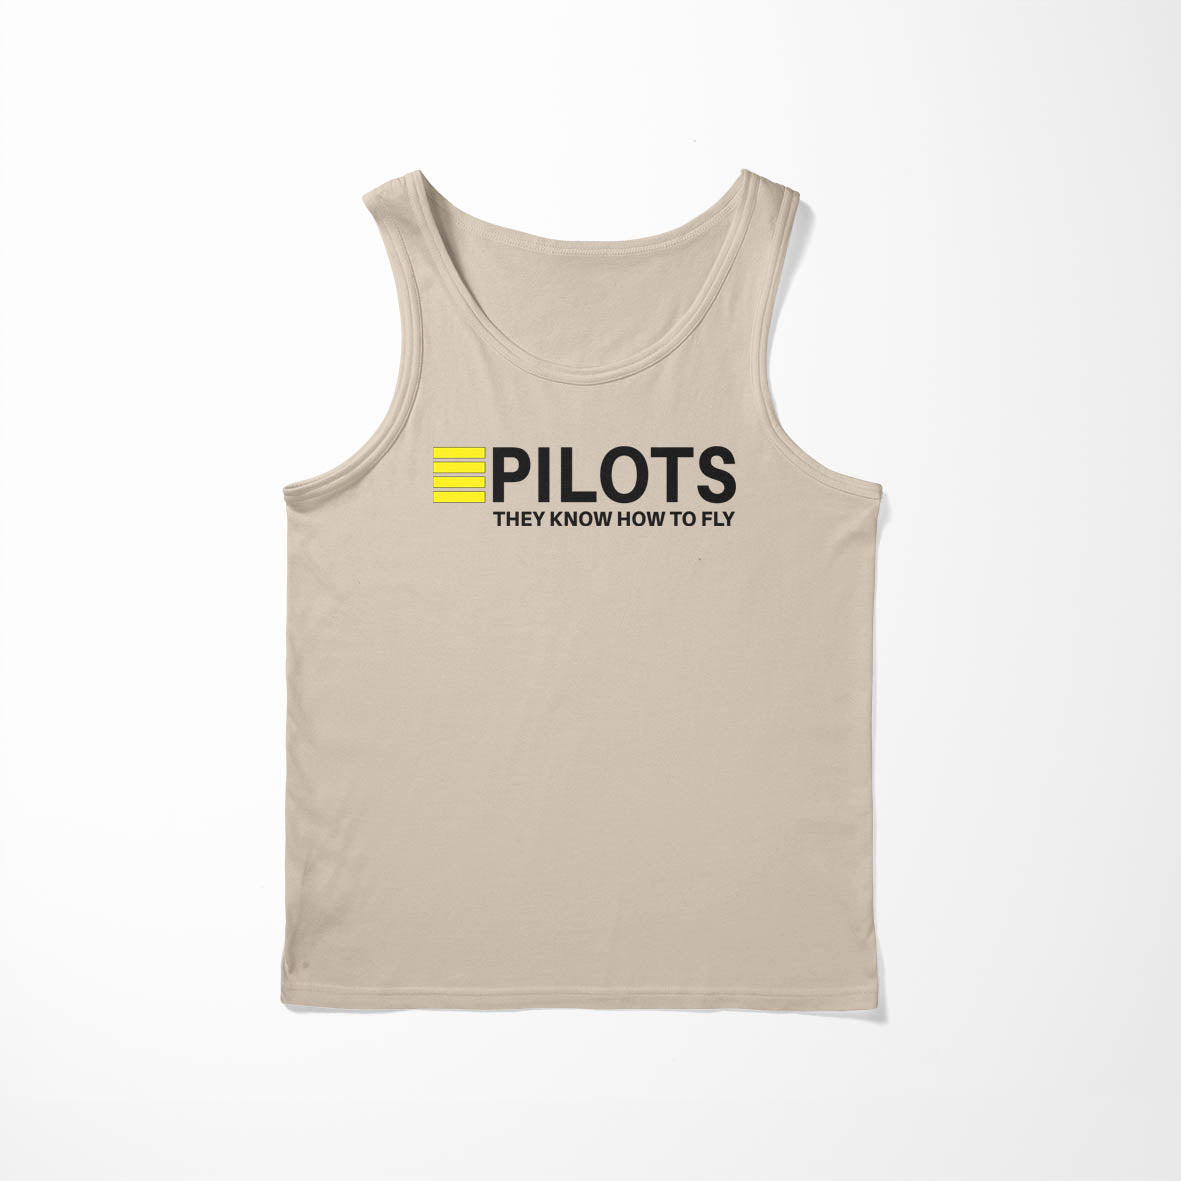 Pilots They Know How To Fly Designed Tank Tops